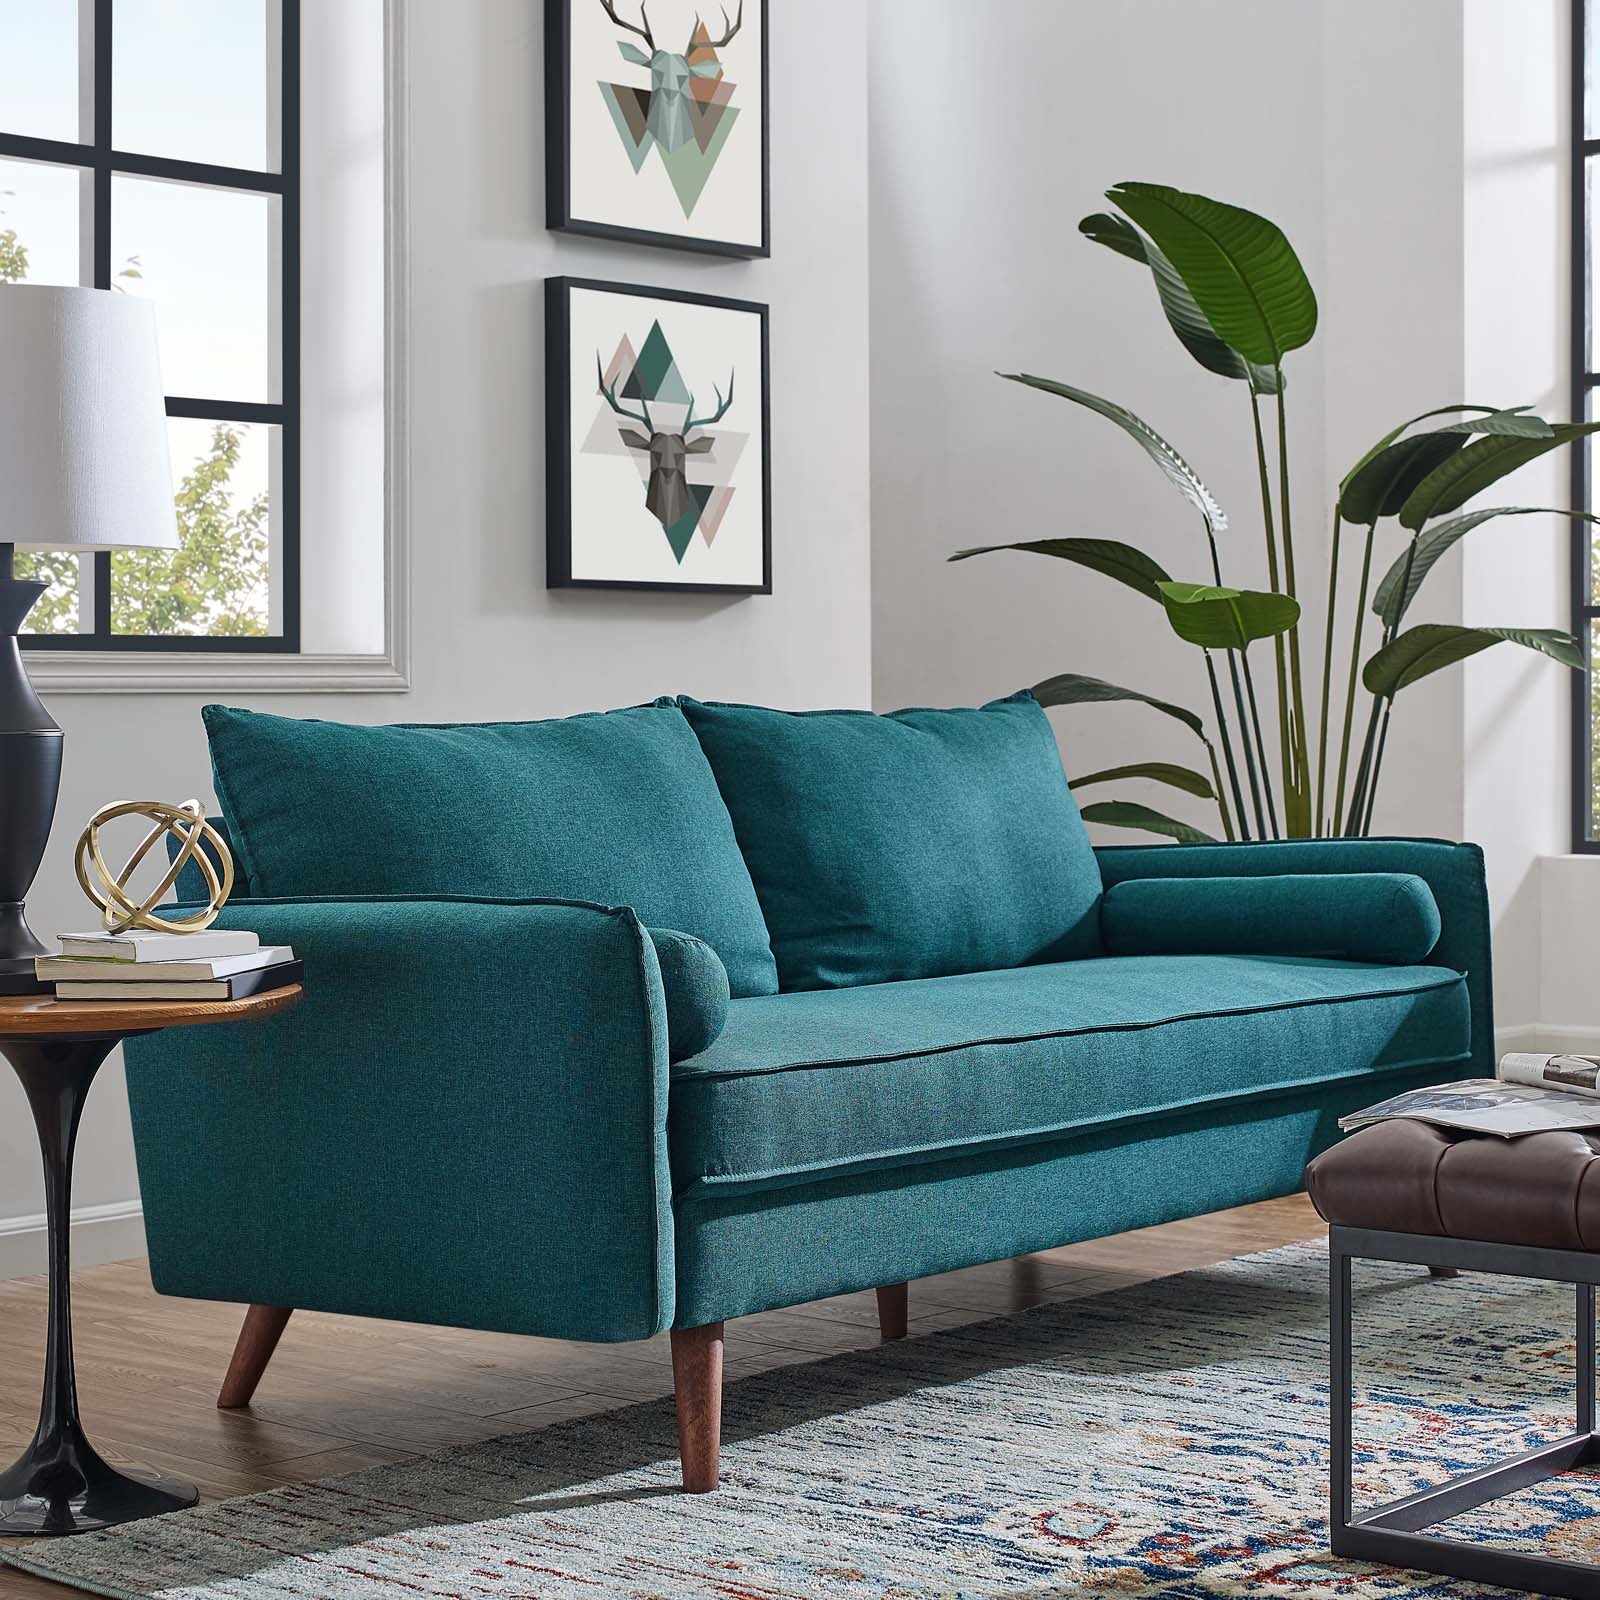 Modway Sofas & Couches - Revive Upholstered Fabric Sofa Teal